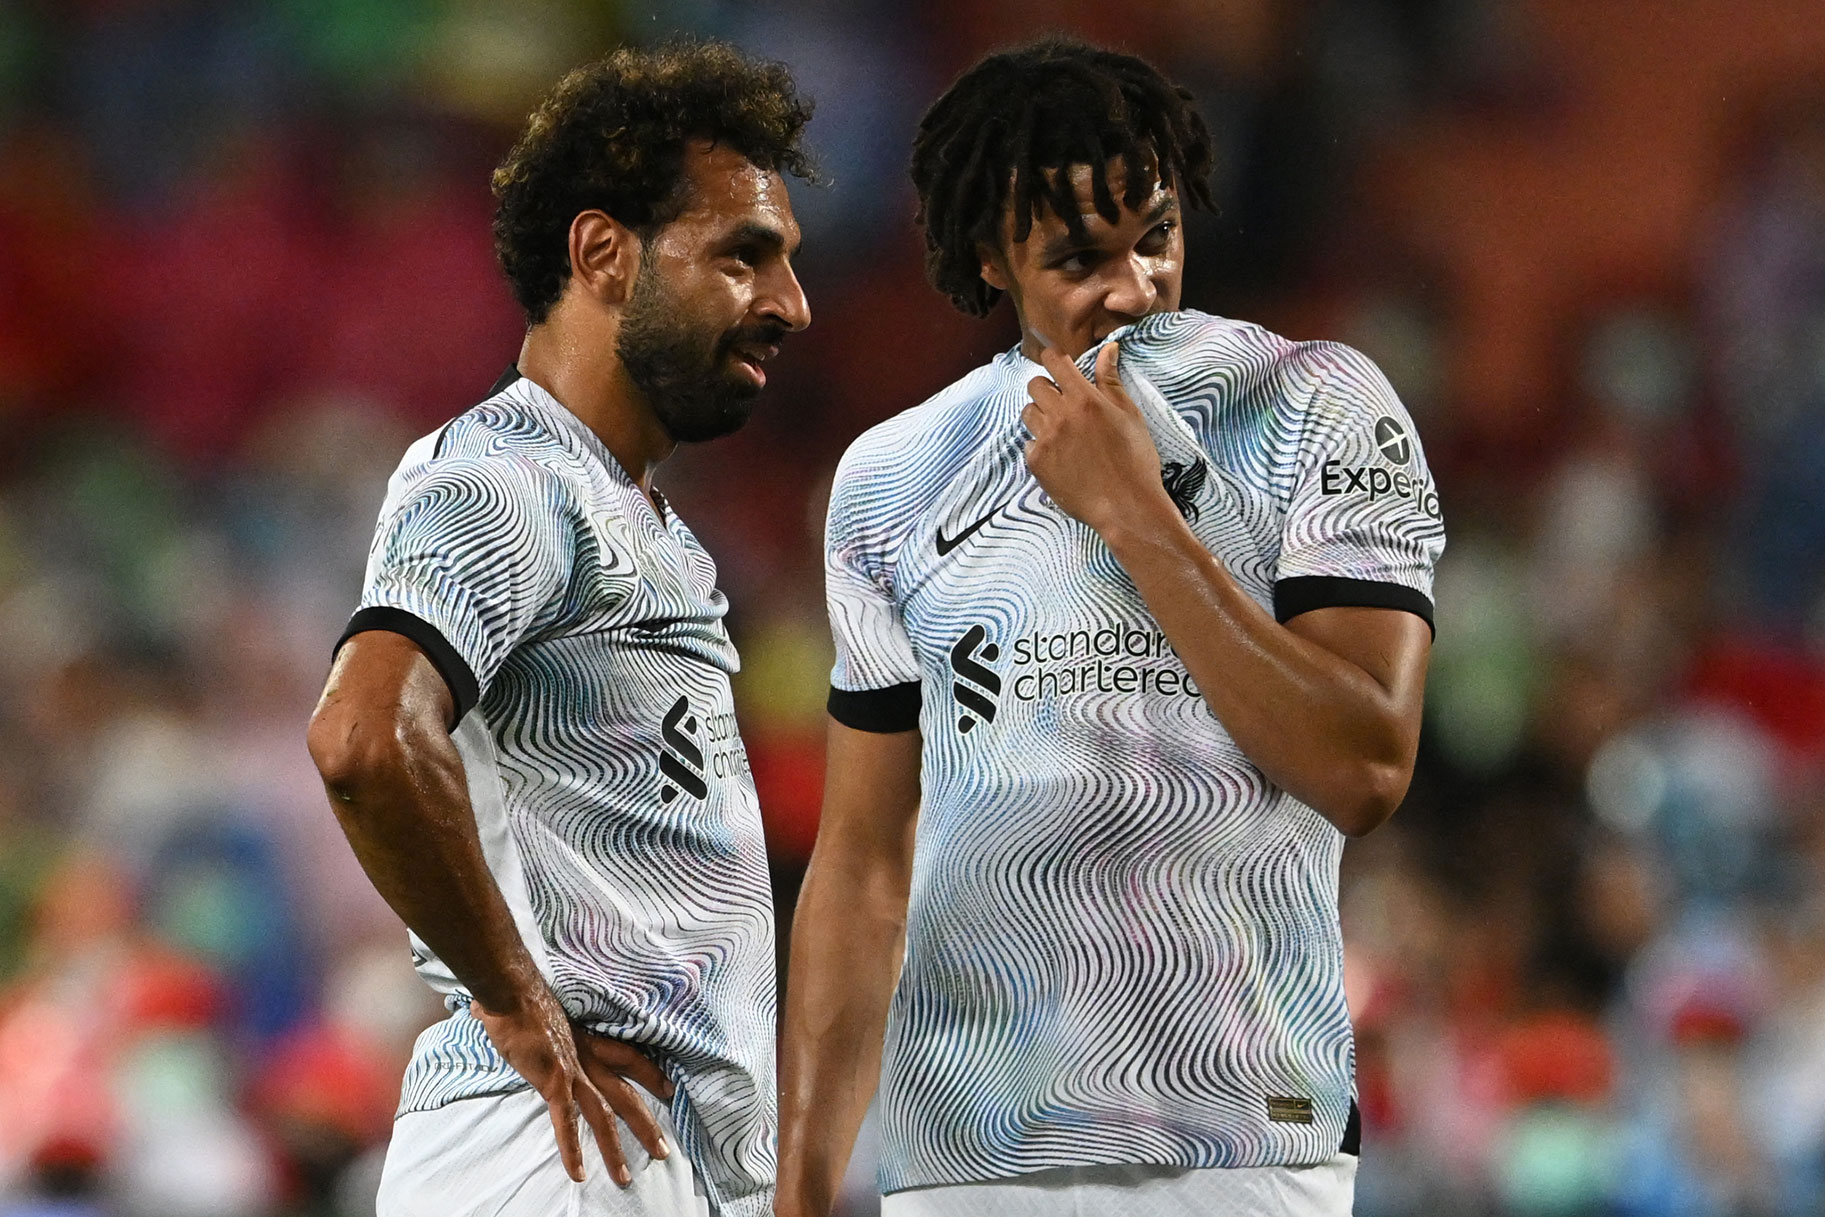 Liverpool's Egyptian forward Mohamed Salah talks with Liverpool's English defender Trent Alexander-Arnold (R) during an exhibition football match